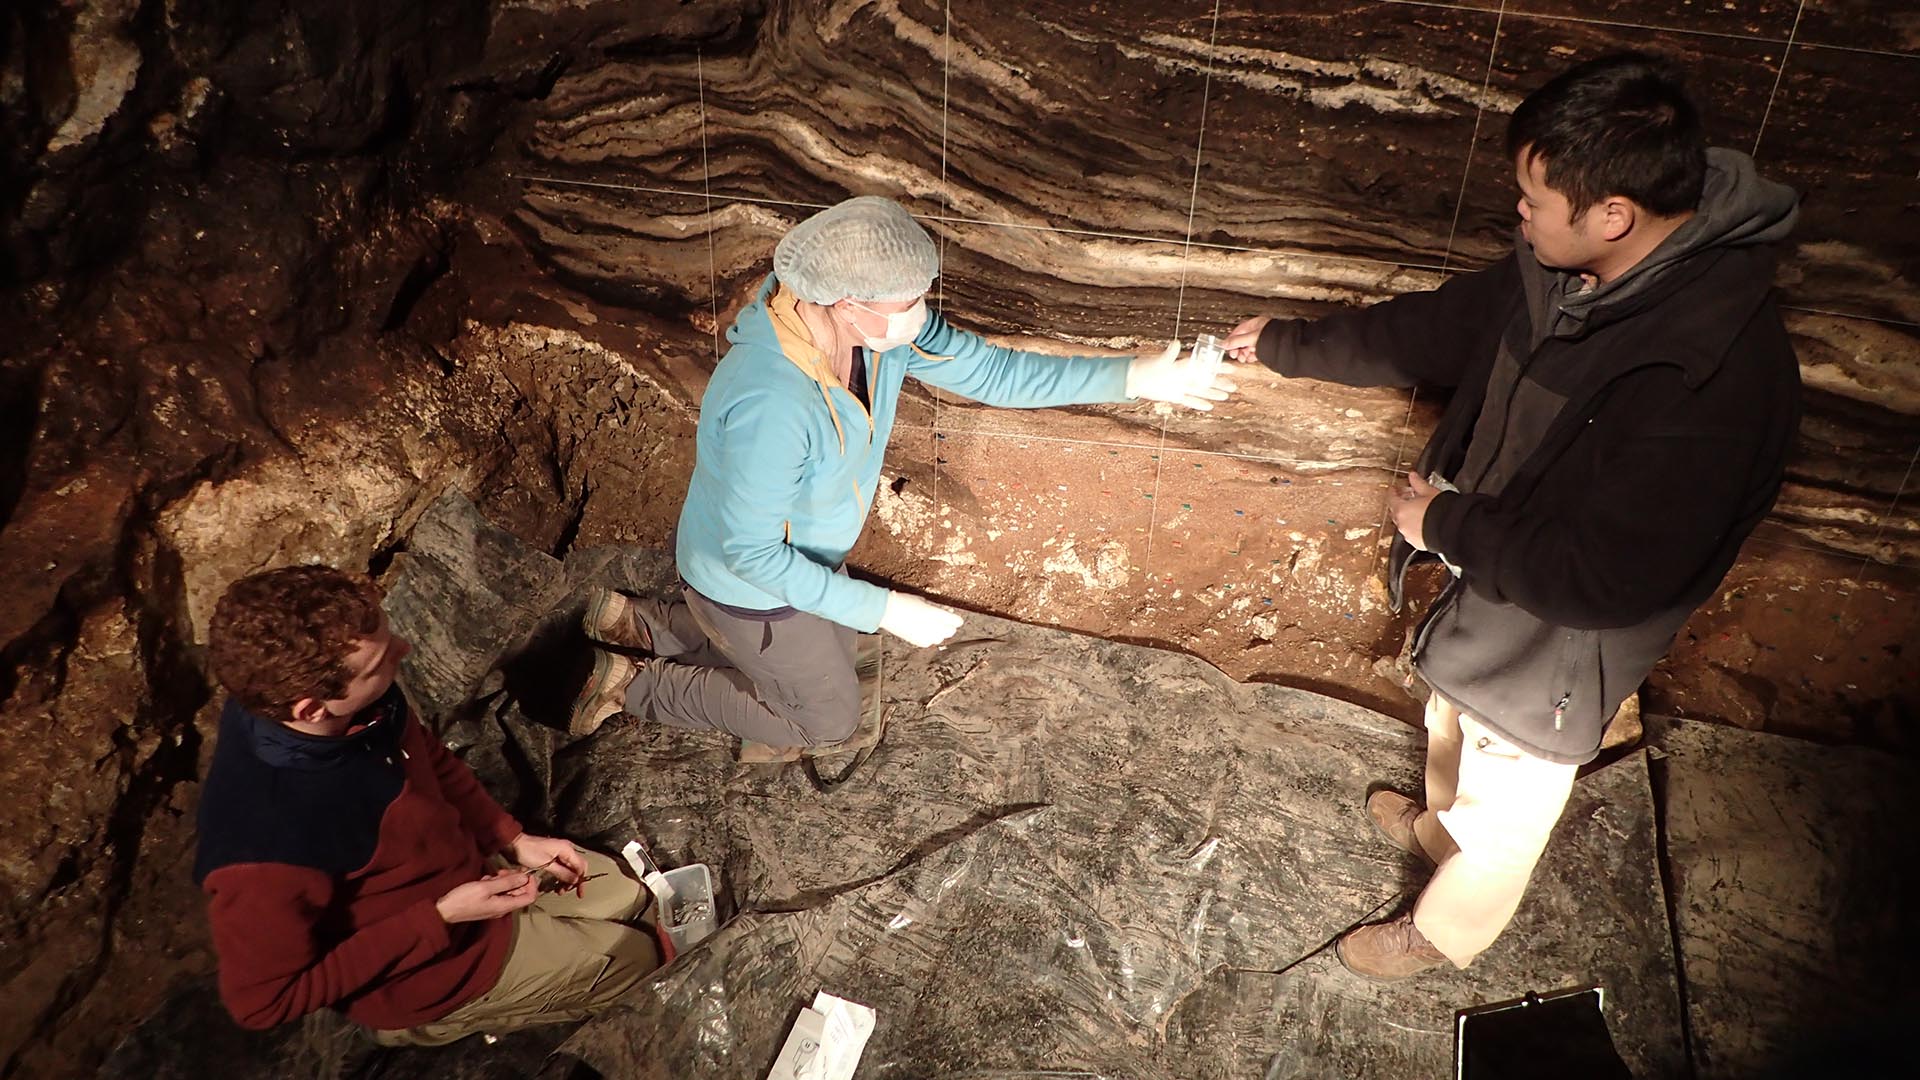 DNA from sediment reveals epic history of Denisova Cave